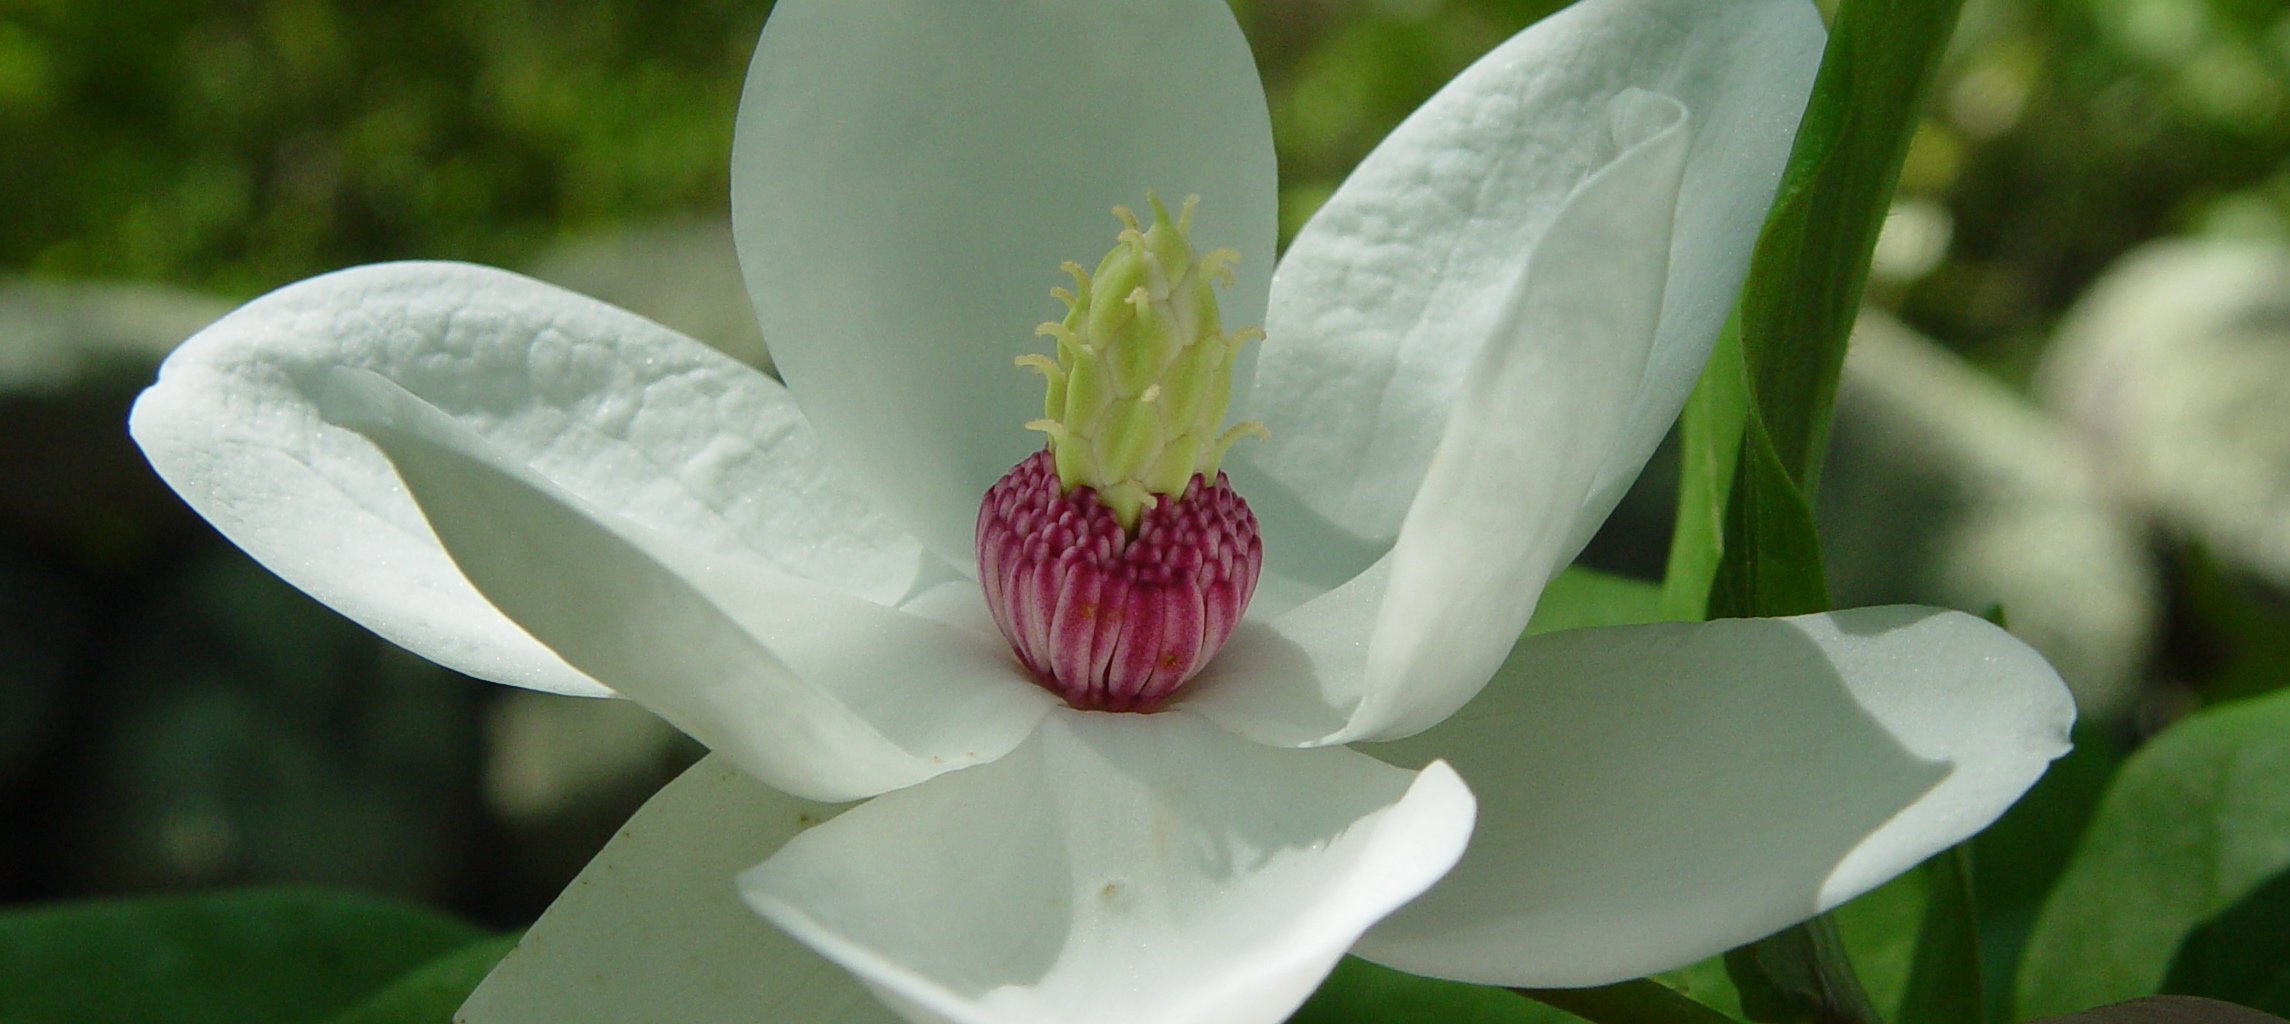 Magnolia Selection, Care, and Maintenance